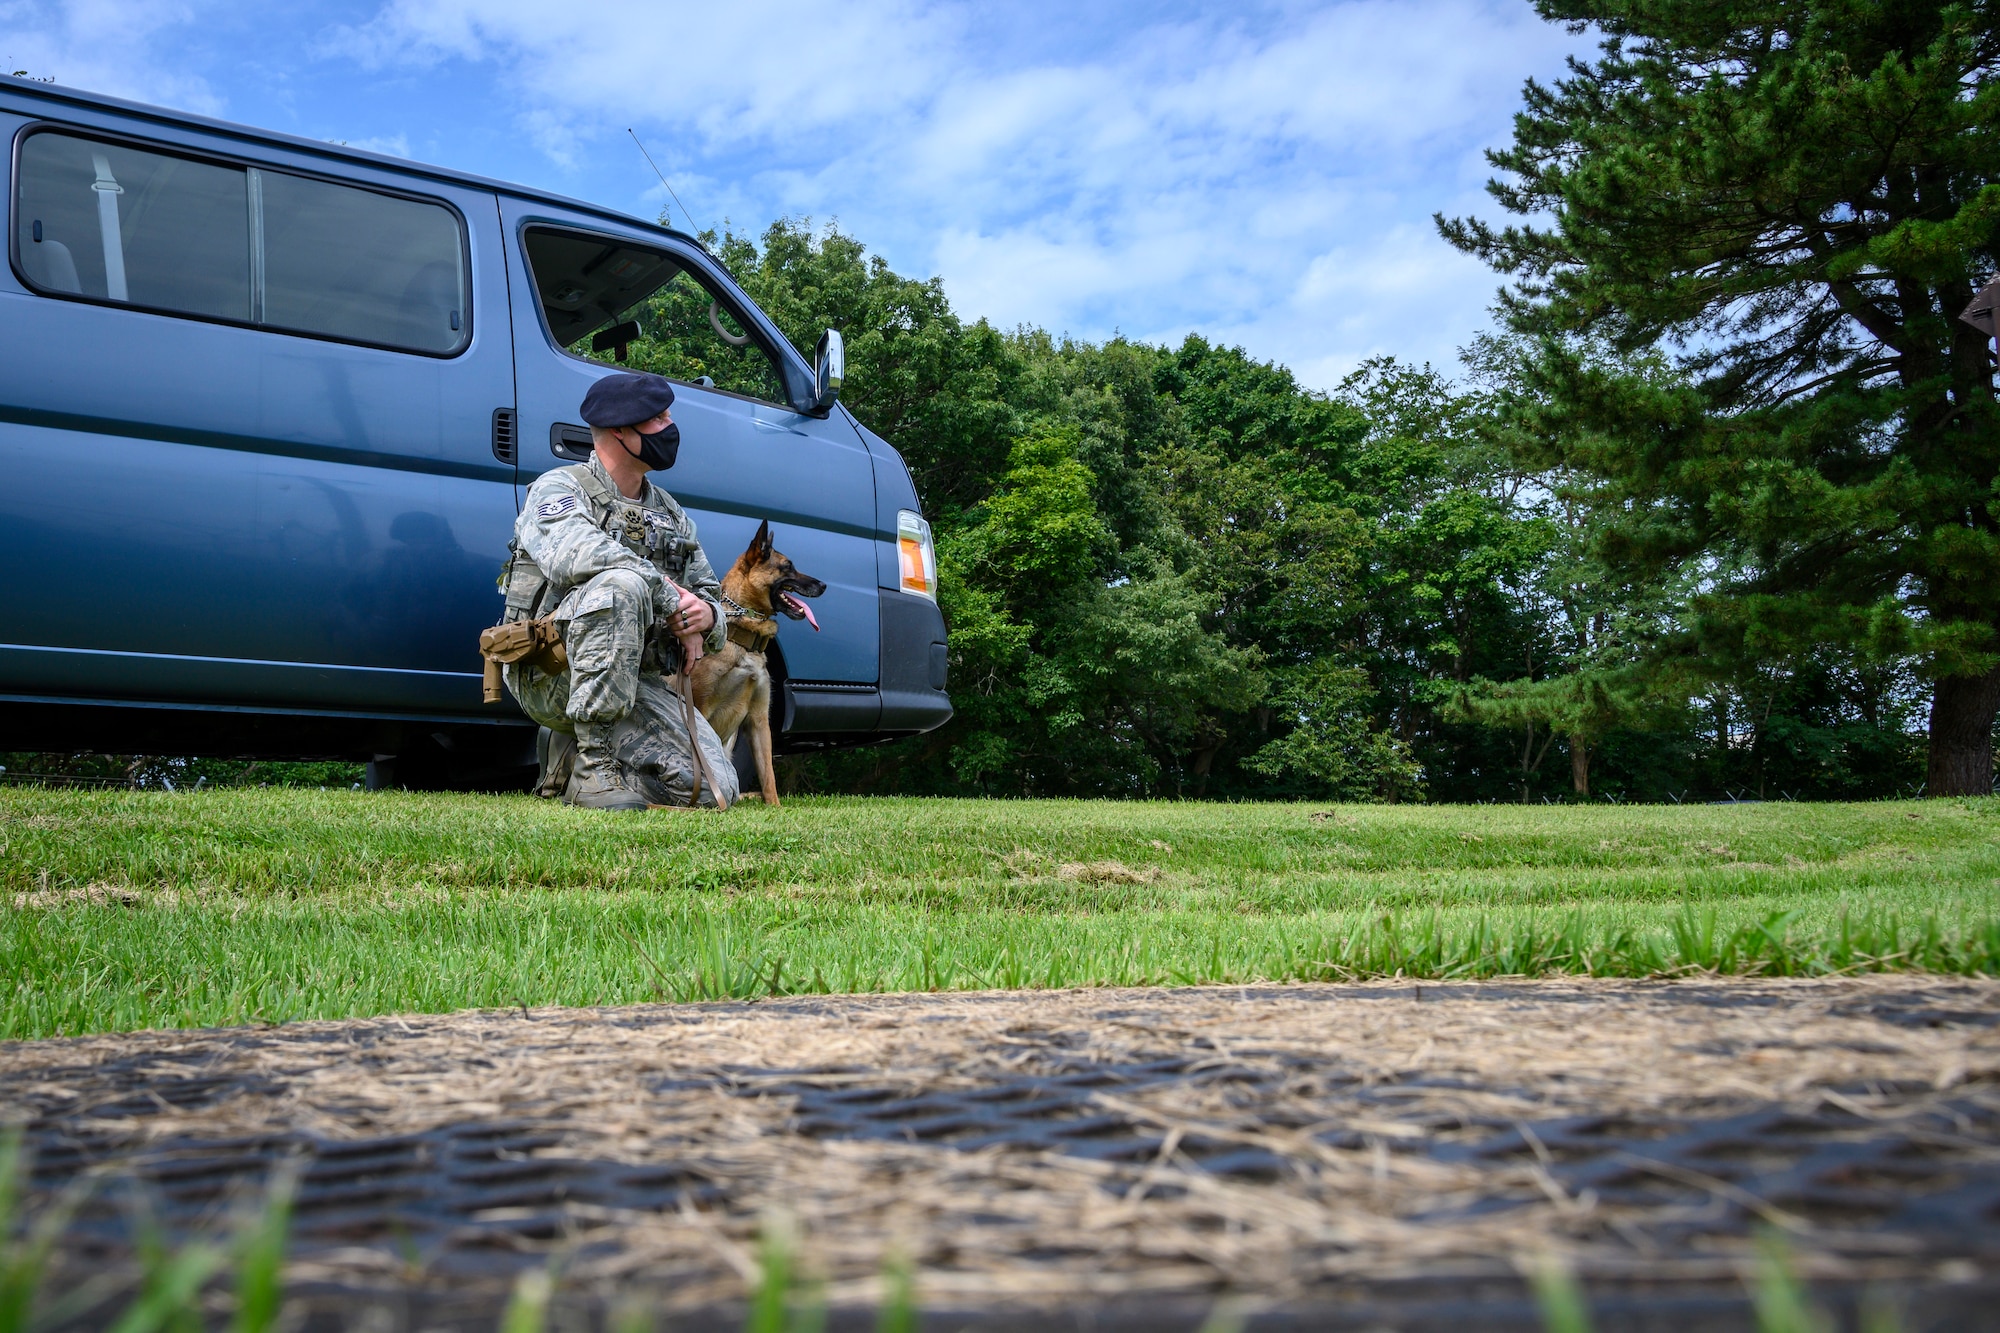 U.S. Air Force Staff Sgt. Anthony Rescheka, a 35th Security Forces Squadron military working dog handler, sits with his MWD, Bella, before a demonstration at Misawa Air Base, Japan, Sept. 17, 2020. Working dog handlers with the 35th Security Forces Squadron's K-9 unit display the skills of their dogs during a demonstration for Chief Master Sgt. Rick Winegardner Jr, the U.S. Forces Japan command chief. The dogs train on how to detect explosives and narcotics as well as perform controlled aggression tactics when detaining suspects. (U.S. Air Force photo by Airman 1st Class China M. Shock)